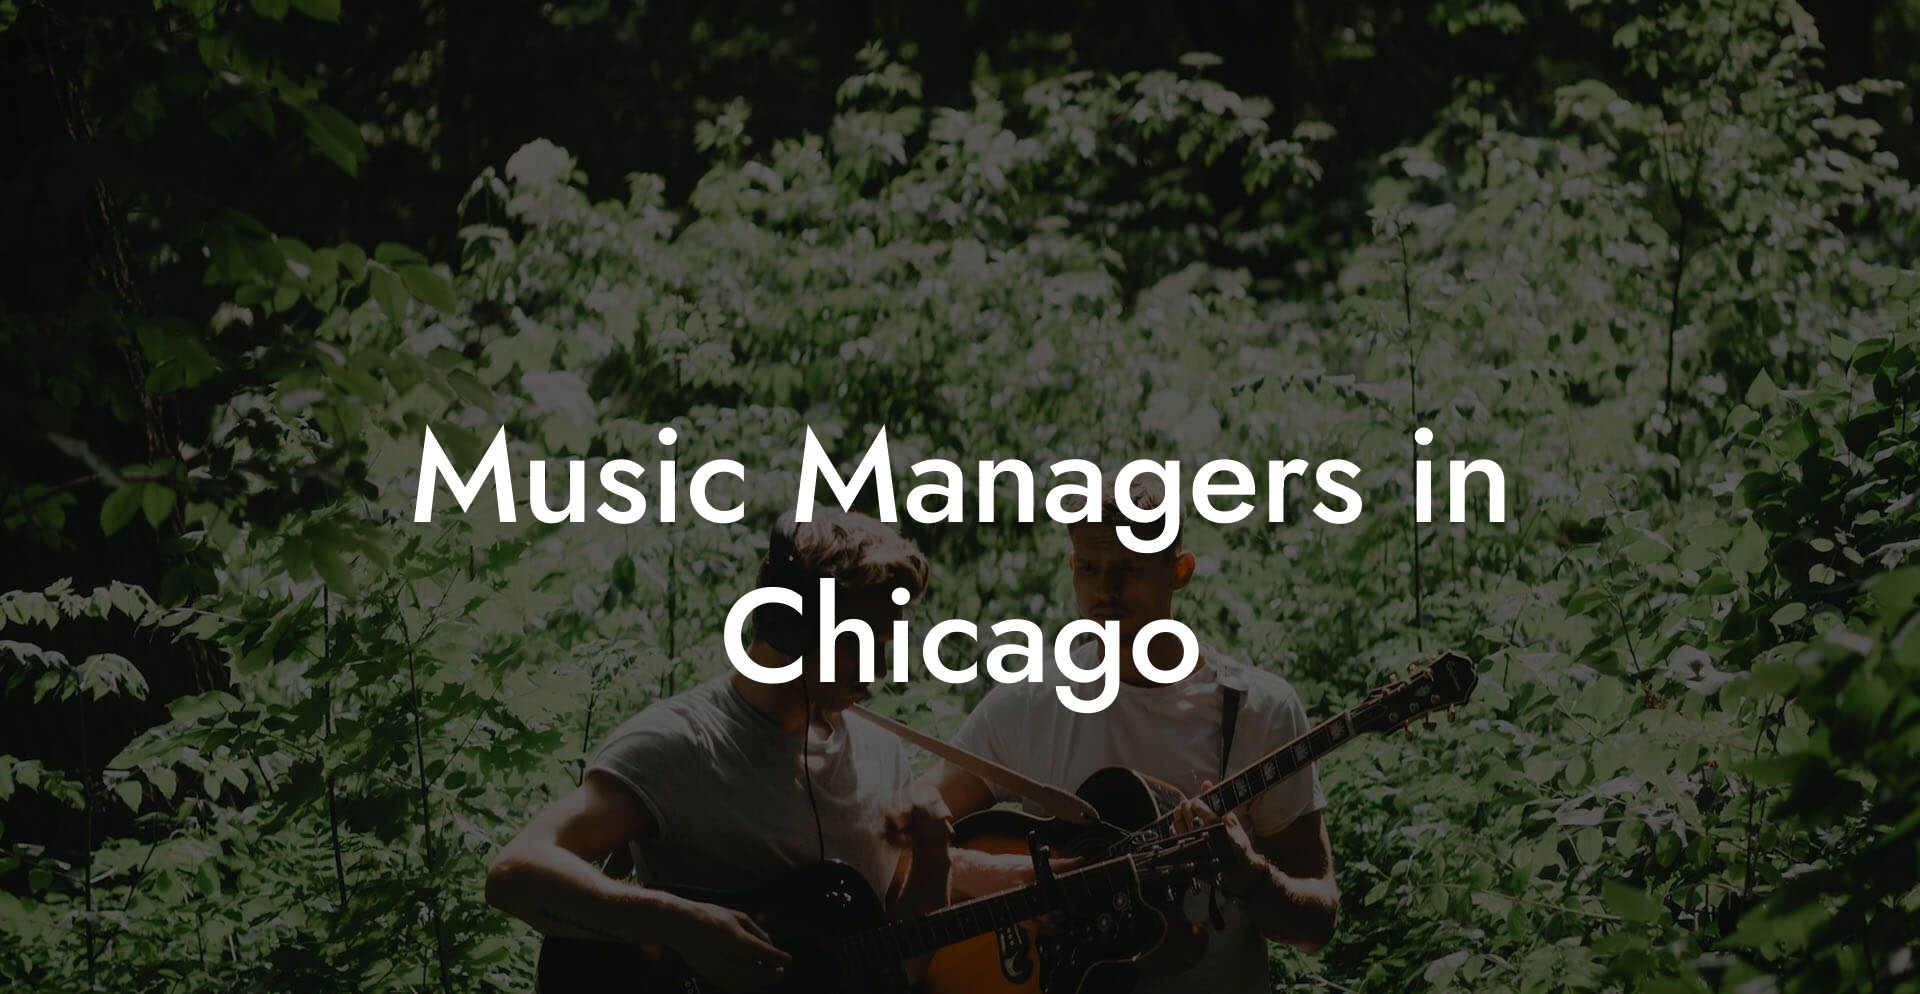 Music Managers in Chicago